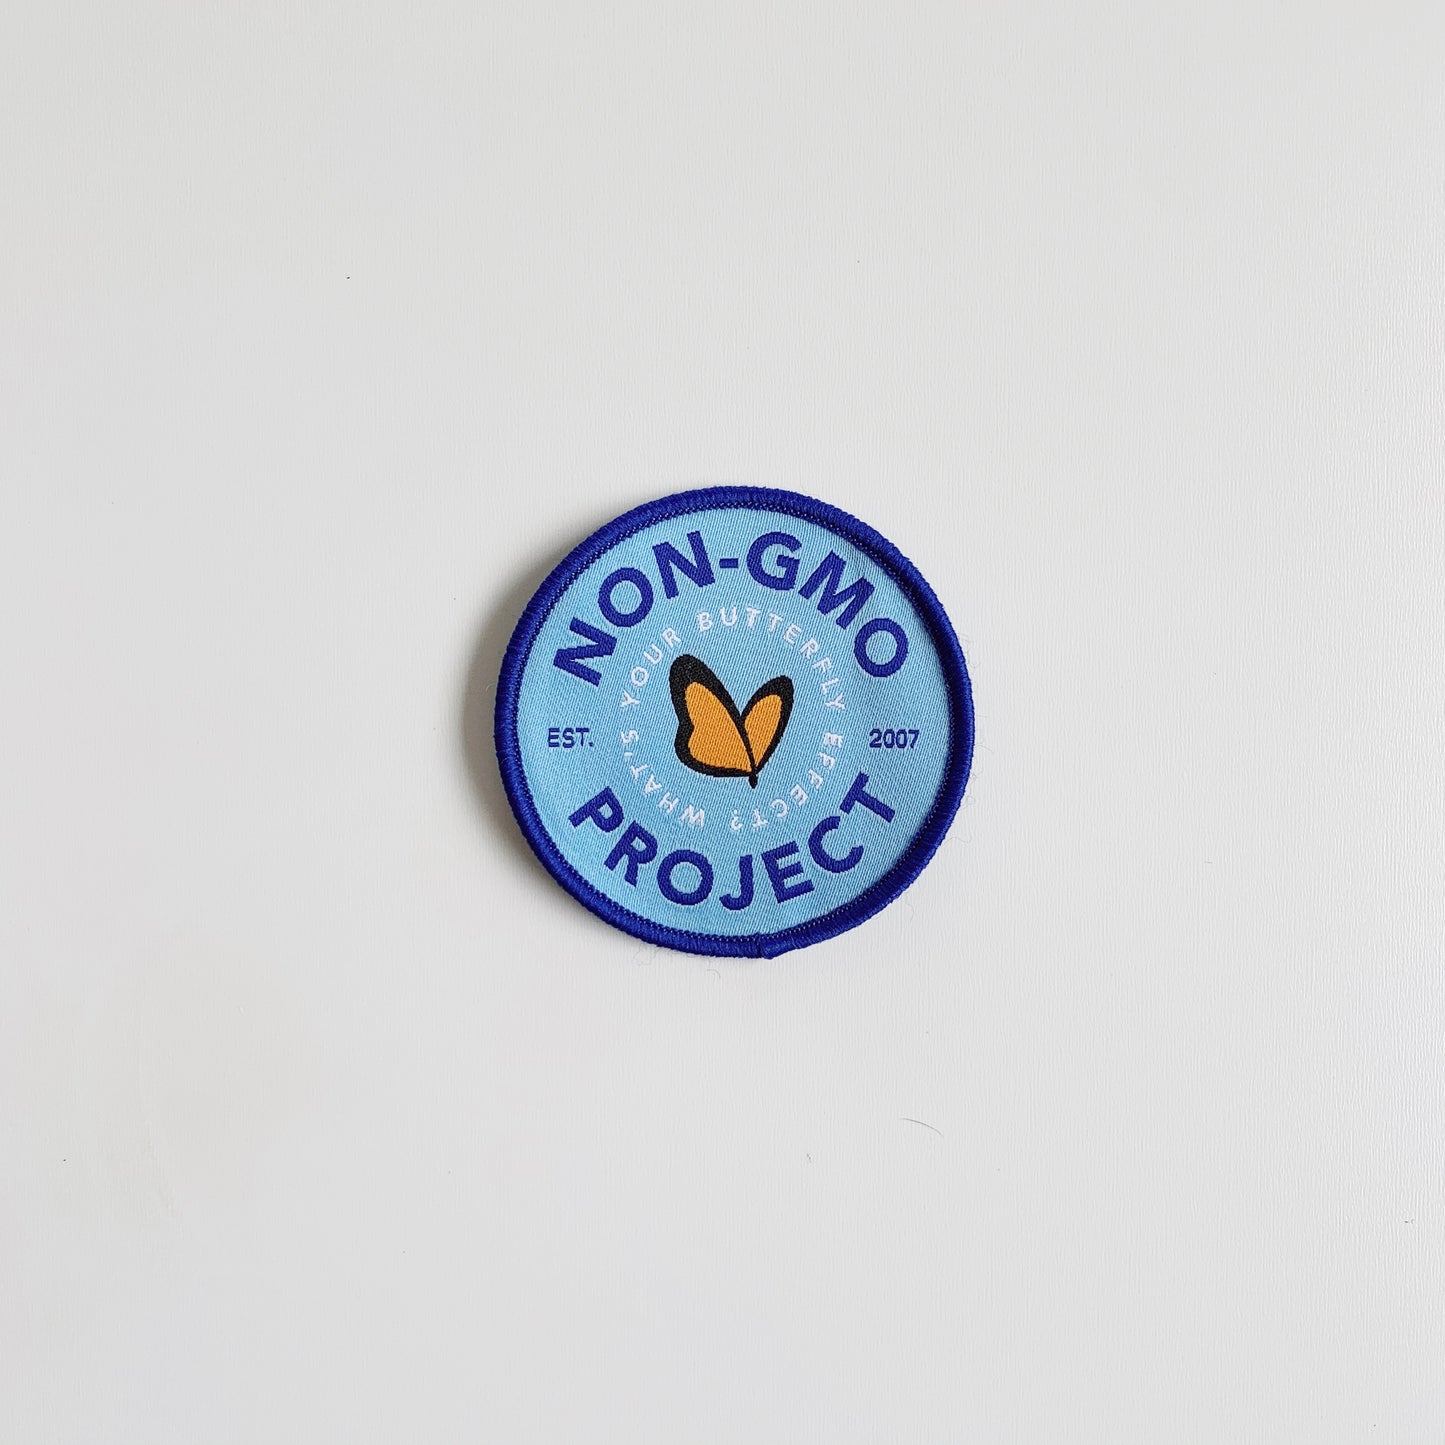 Single Non-GMO Project patch in navy, light blue, and orange